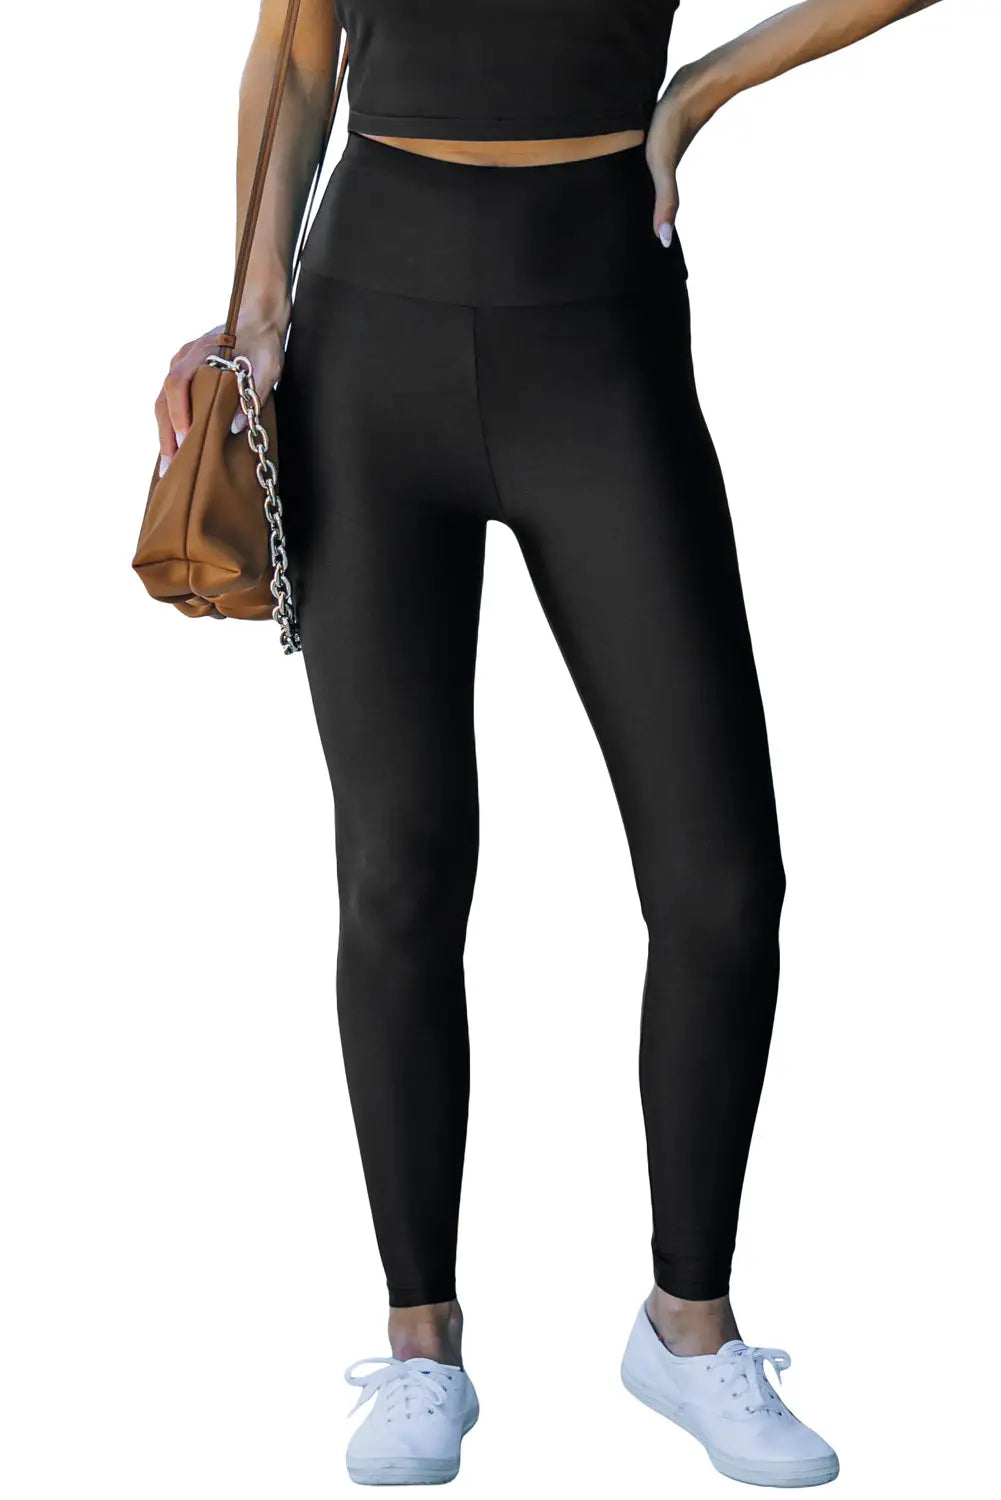 Black high rise tight leggings with waist cincher - bottoms